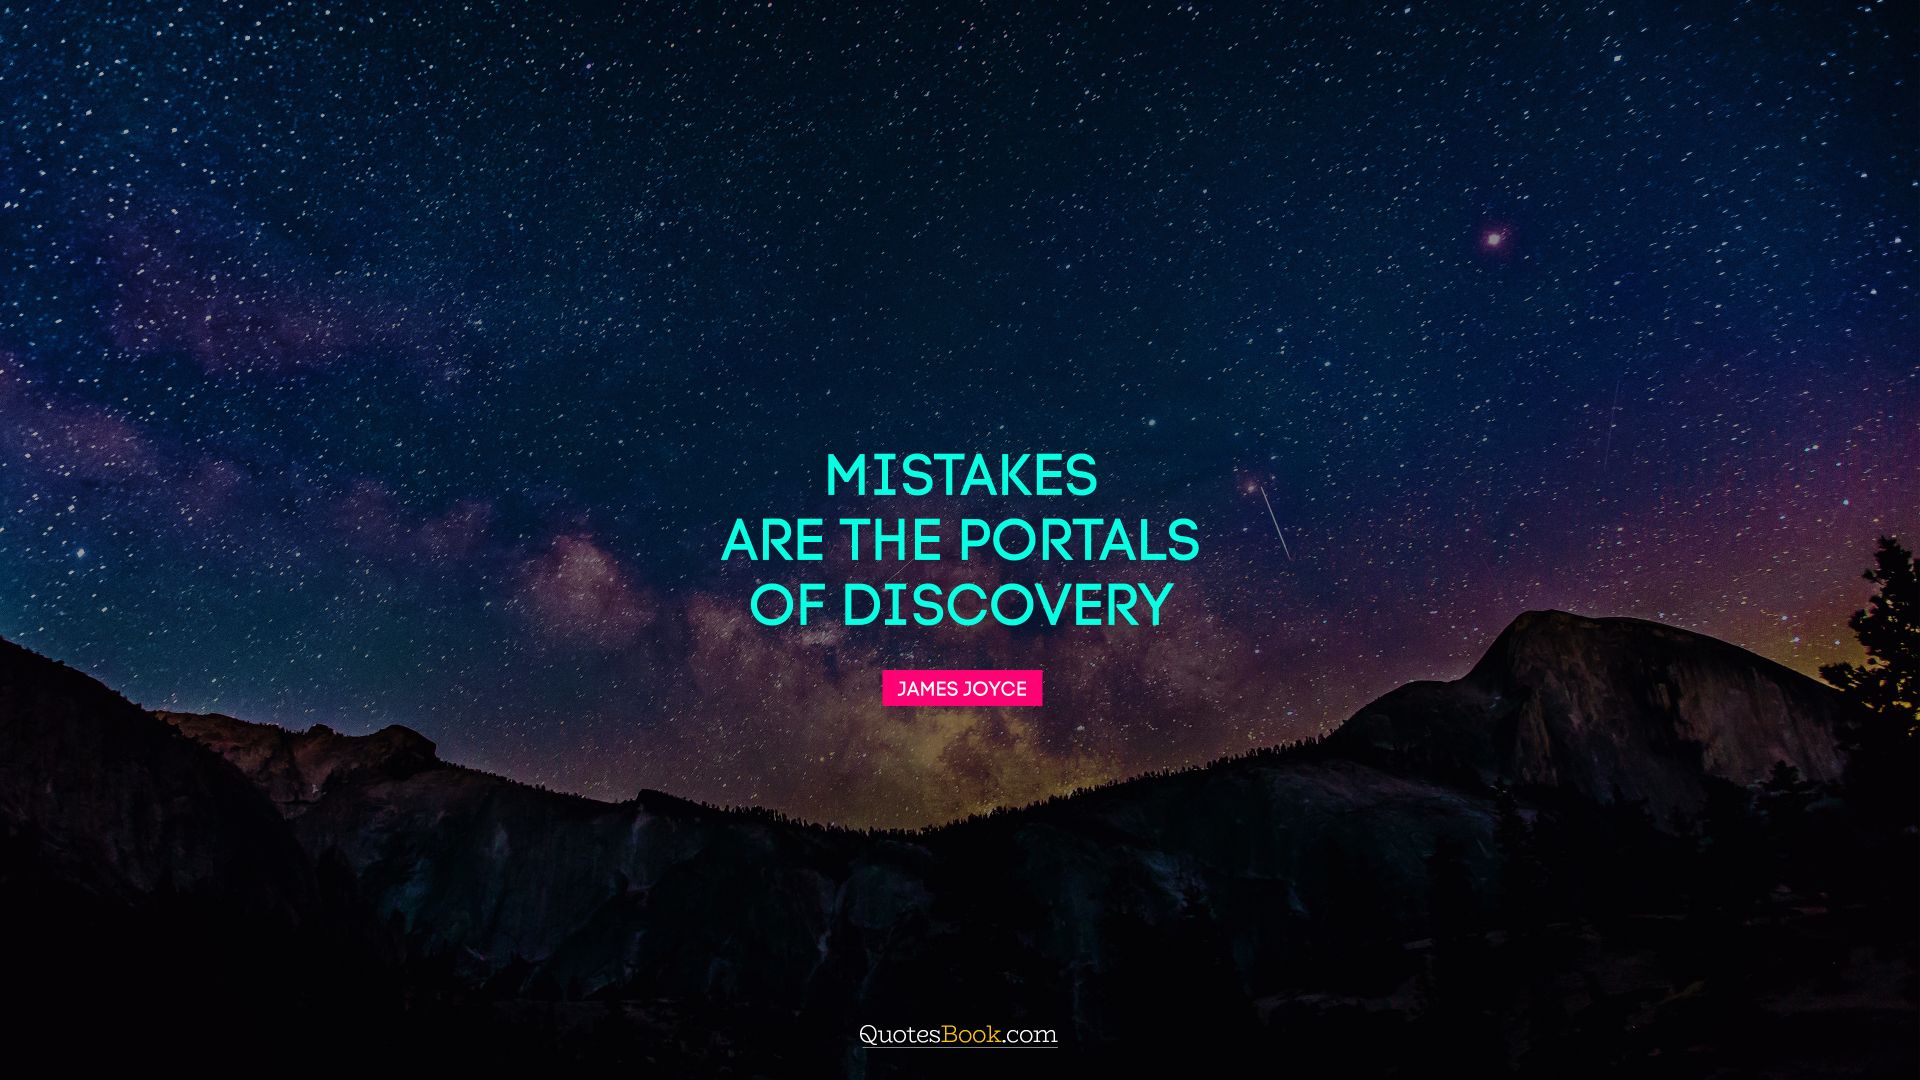 Mistakes are the portals of discovery. - Quote by James Joyce